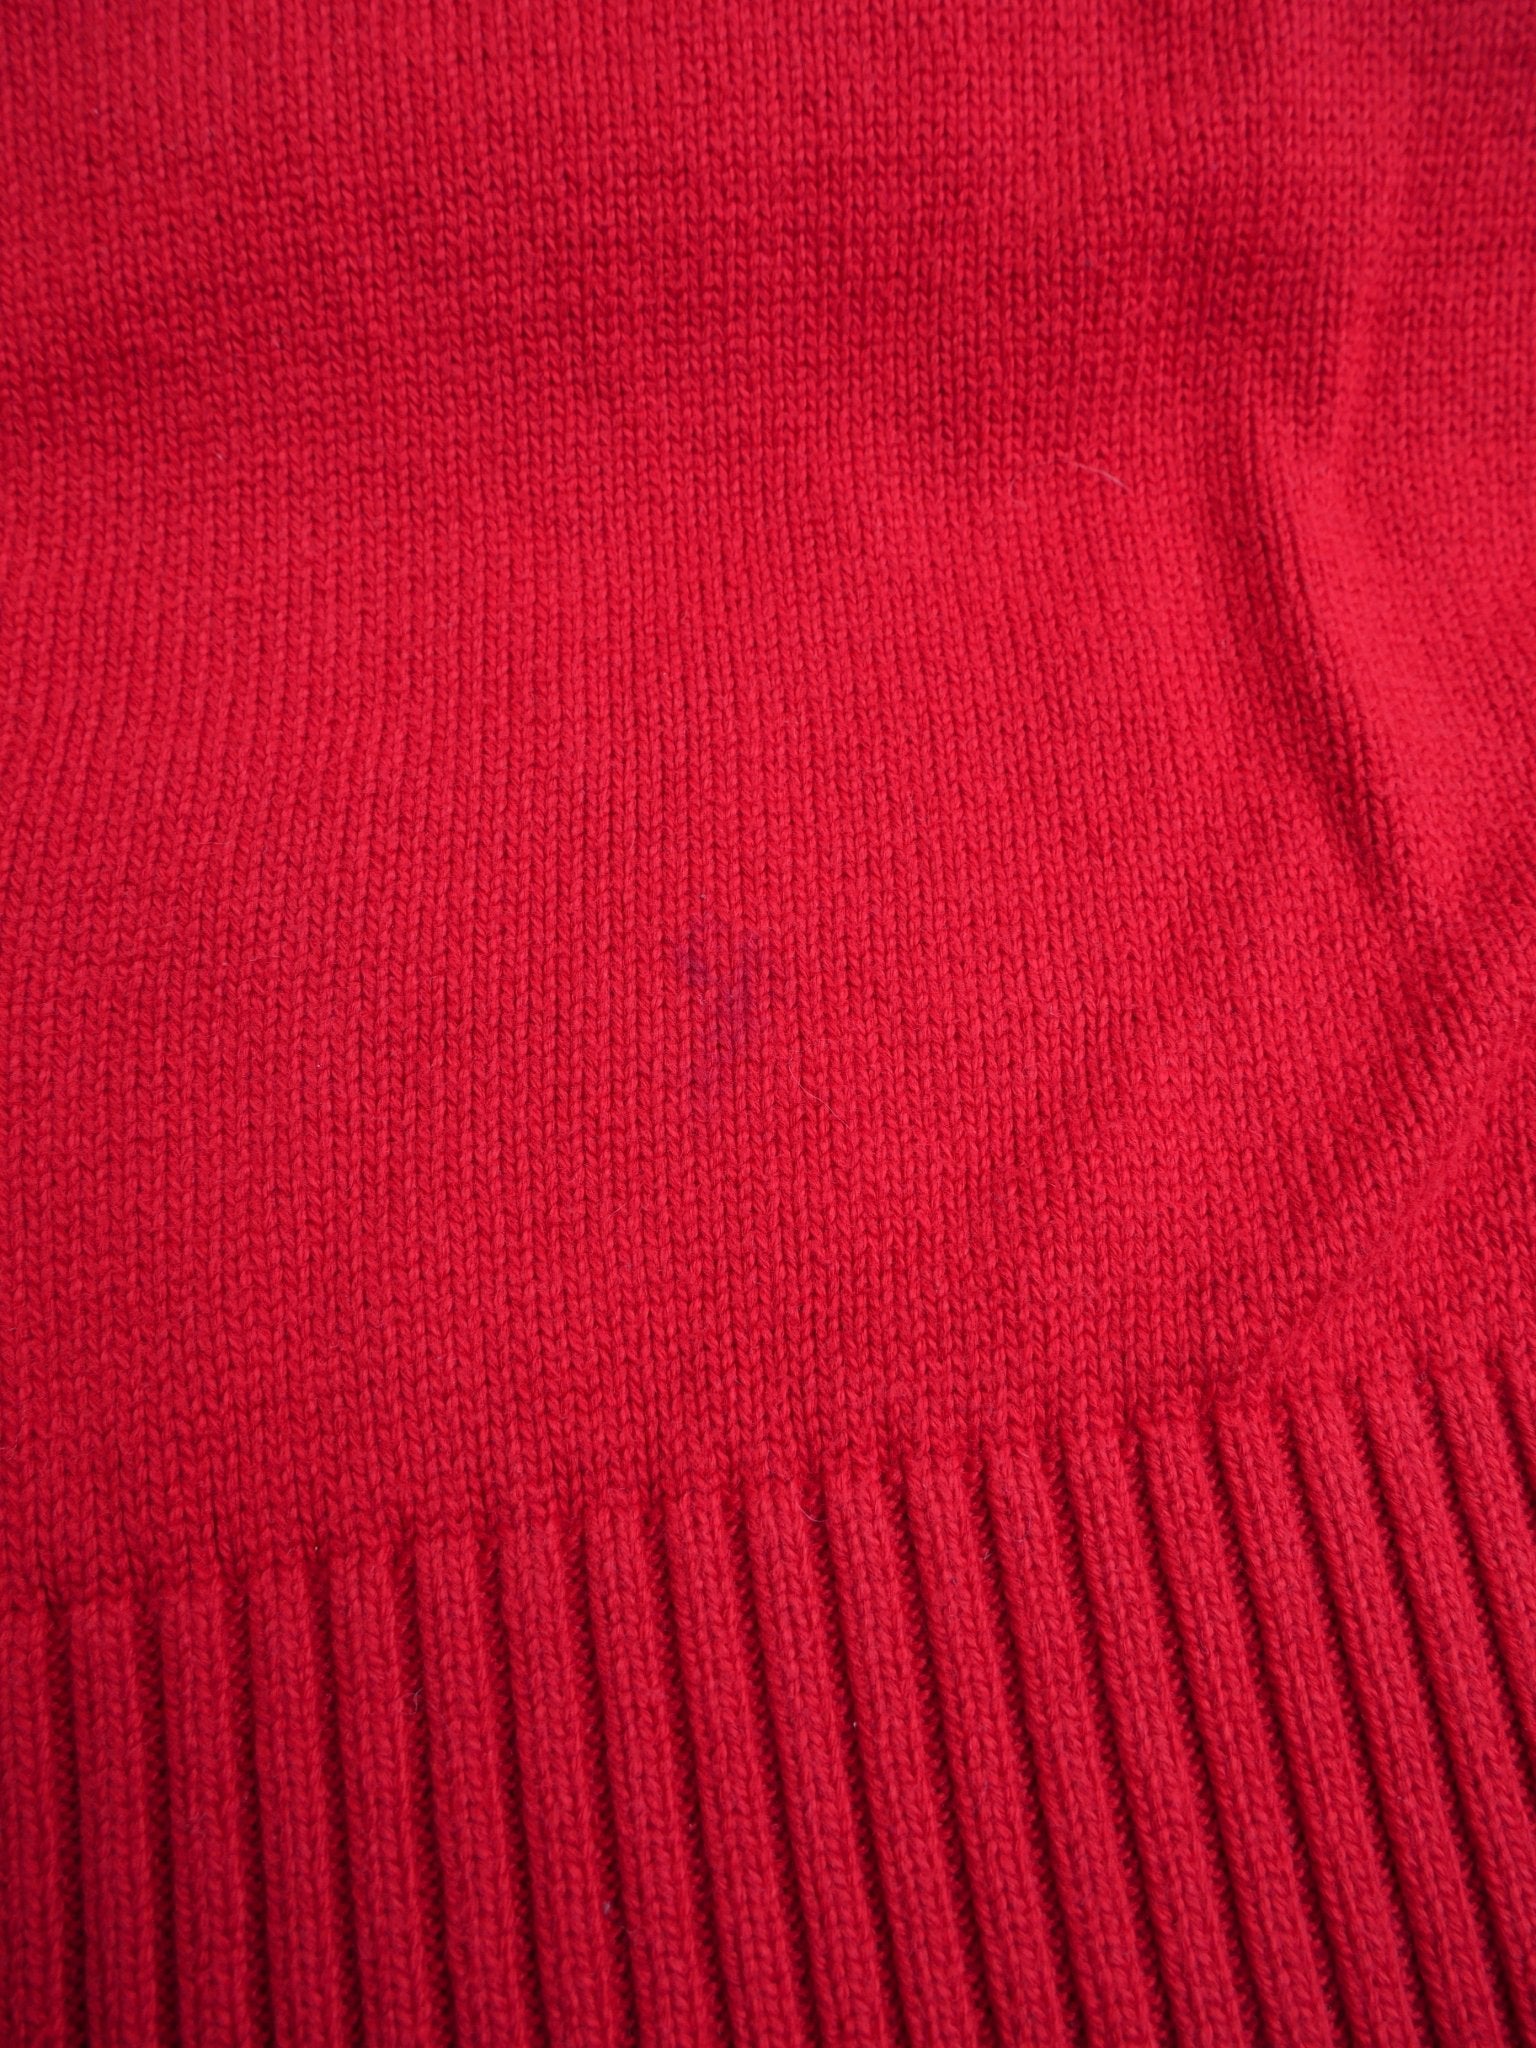 Polo Ralph Lauren embroidered Logo red Half Buttoned Sweater - Peeces